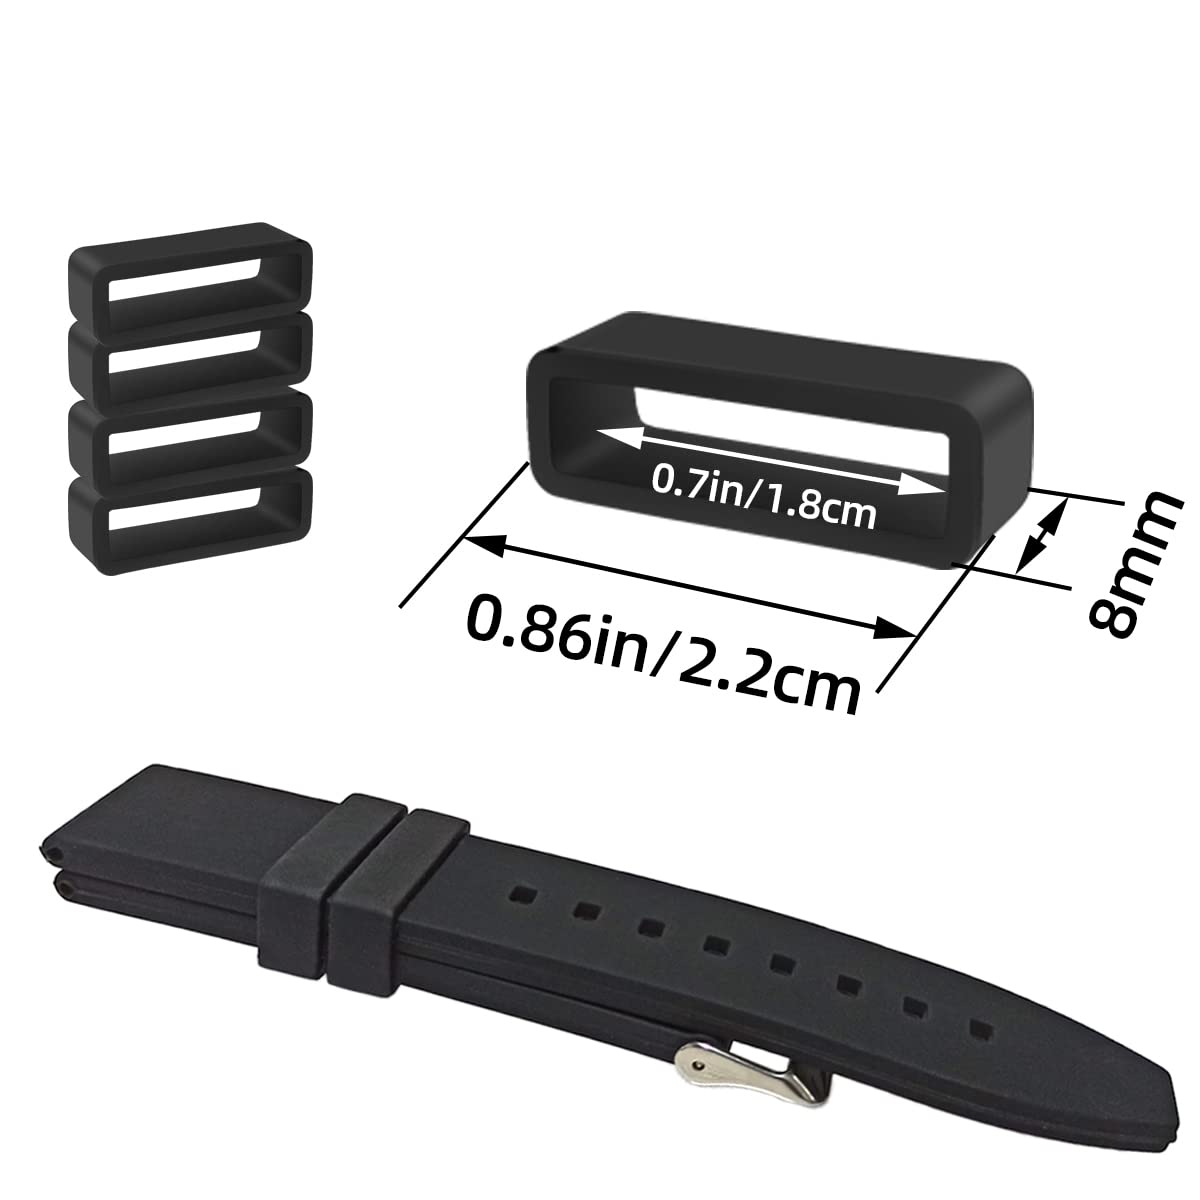 yuntop 6 Pcs Watch Band Loop Holder Keeper for Resin Belt, Replacement Fastener Rings for Silicone Leather Rubber Watch Strap, Durable Fastener Retainer Size(18mm)